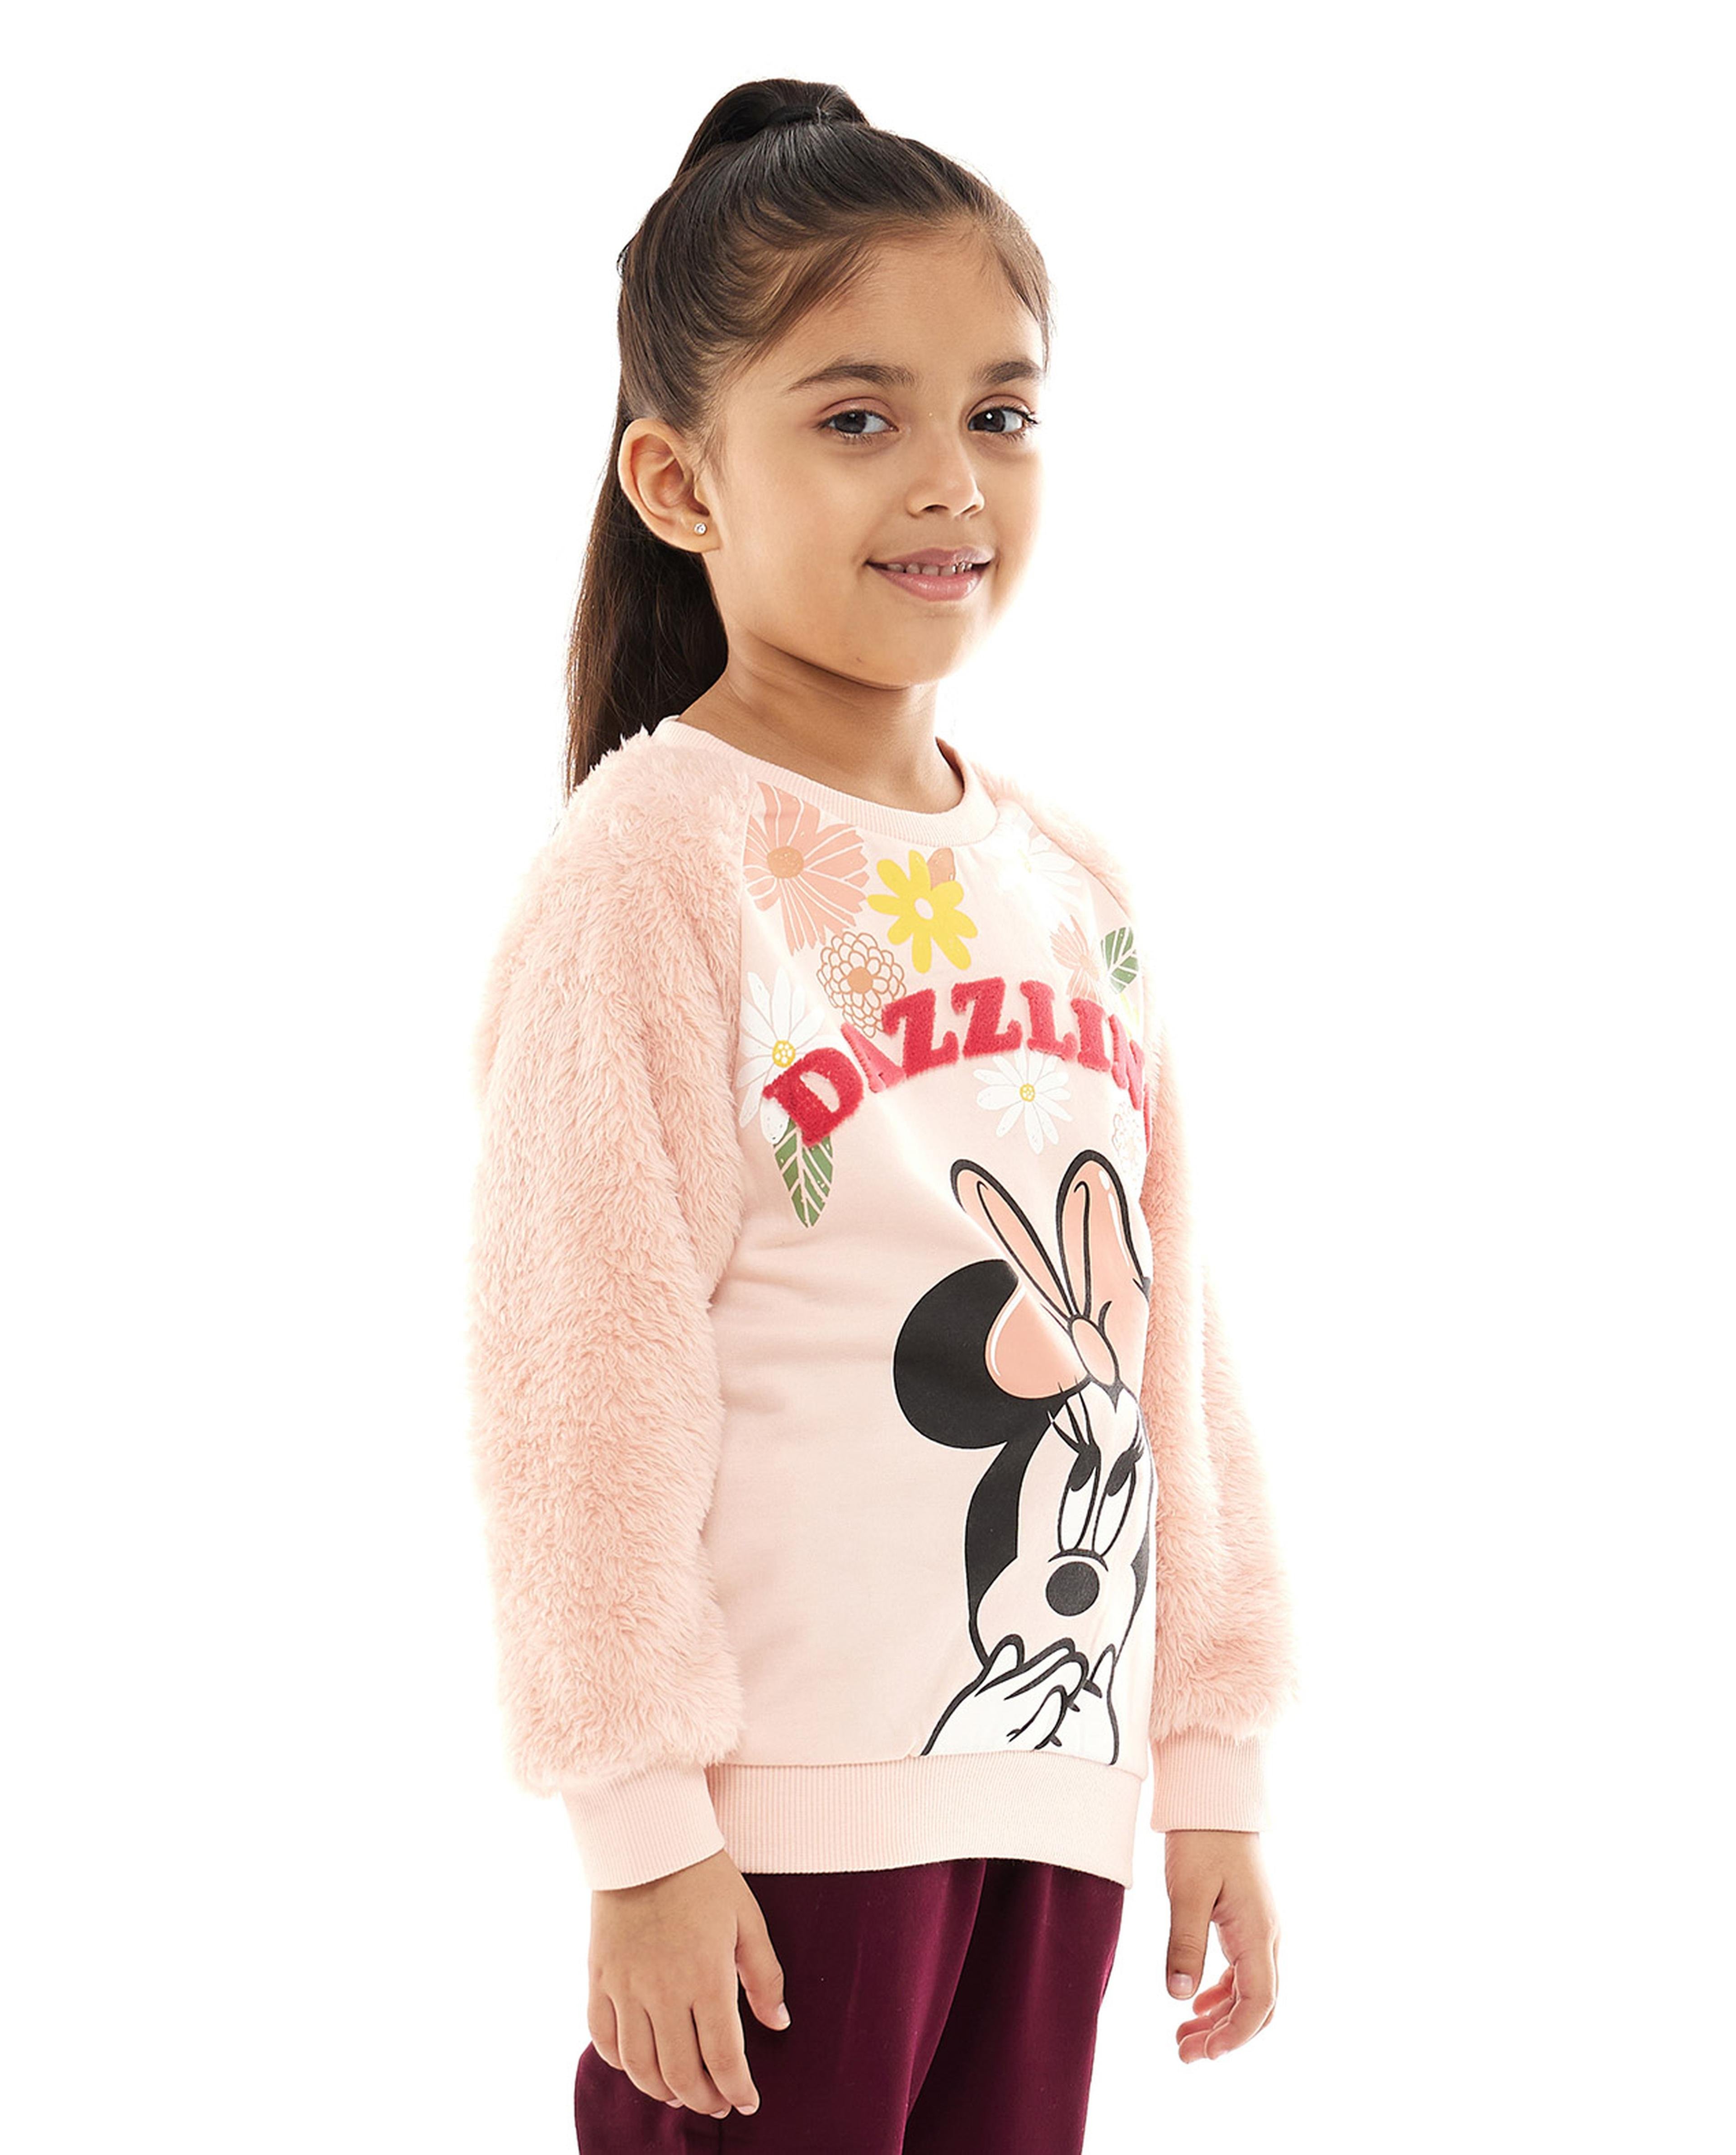 Minnie Embroidered Sweatshirt with Crew Neck and Raglan Sleeves